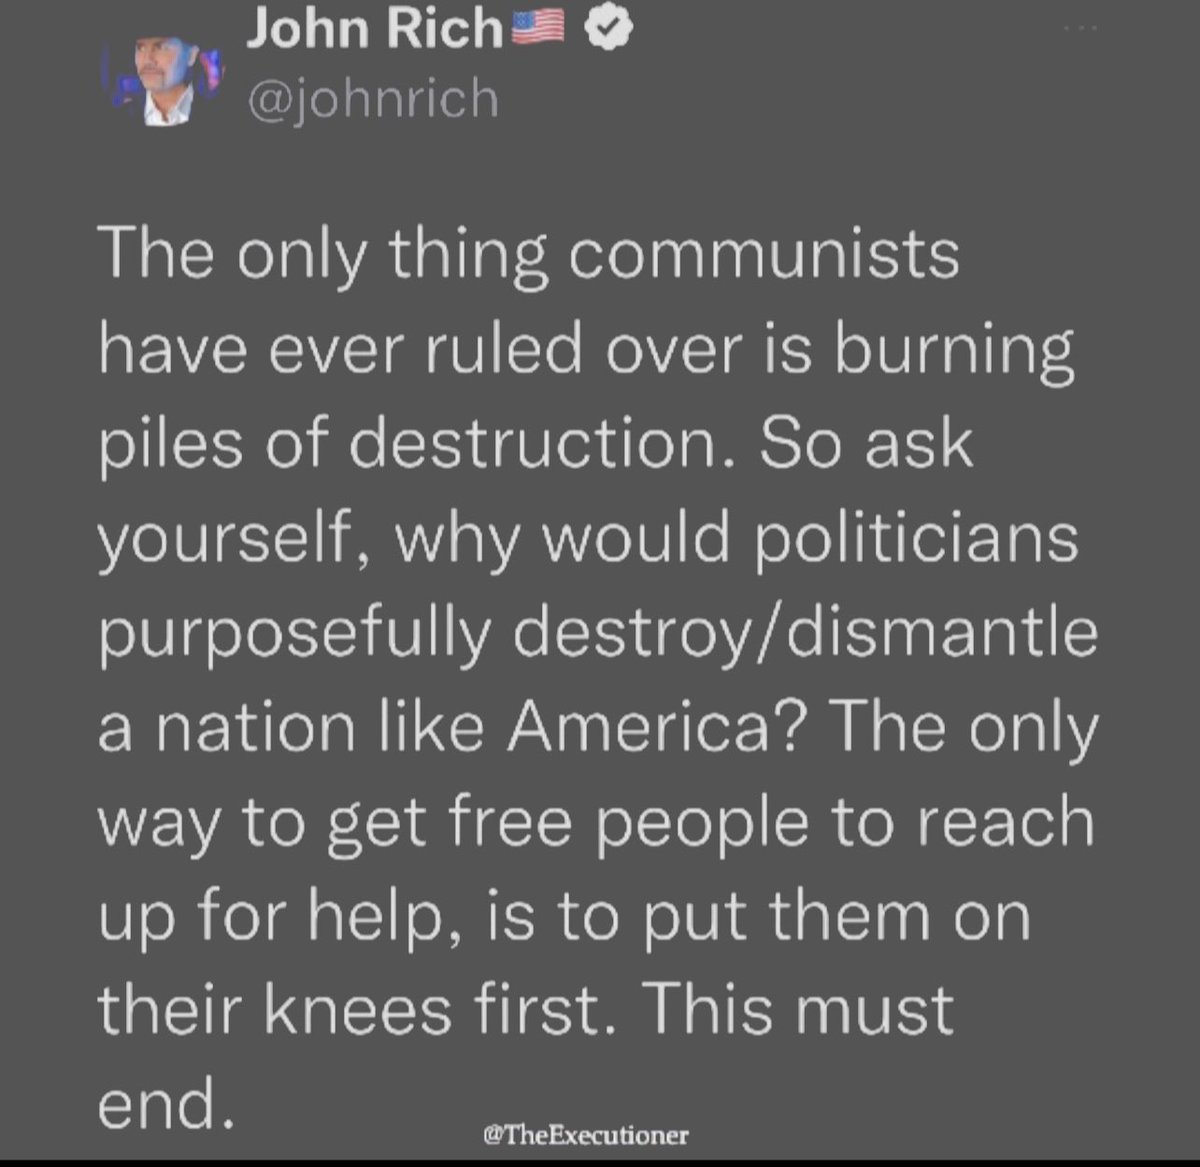 They want a totalitarian government and society dependent on them for everything. Who agrees with John Rich? 🙋‍♂️